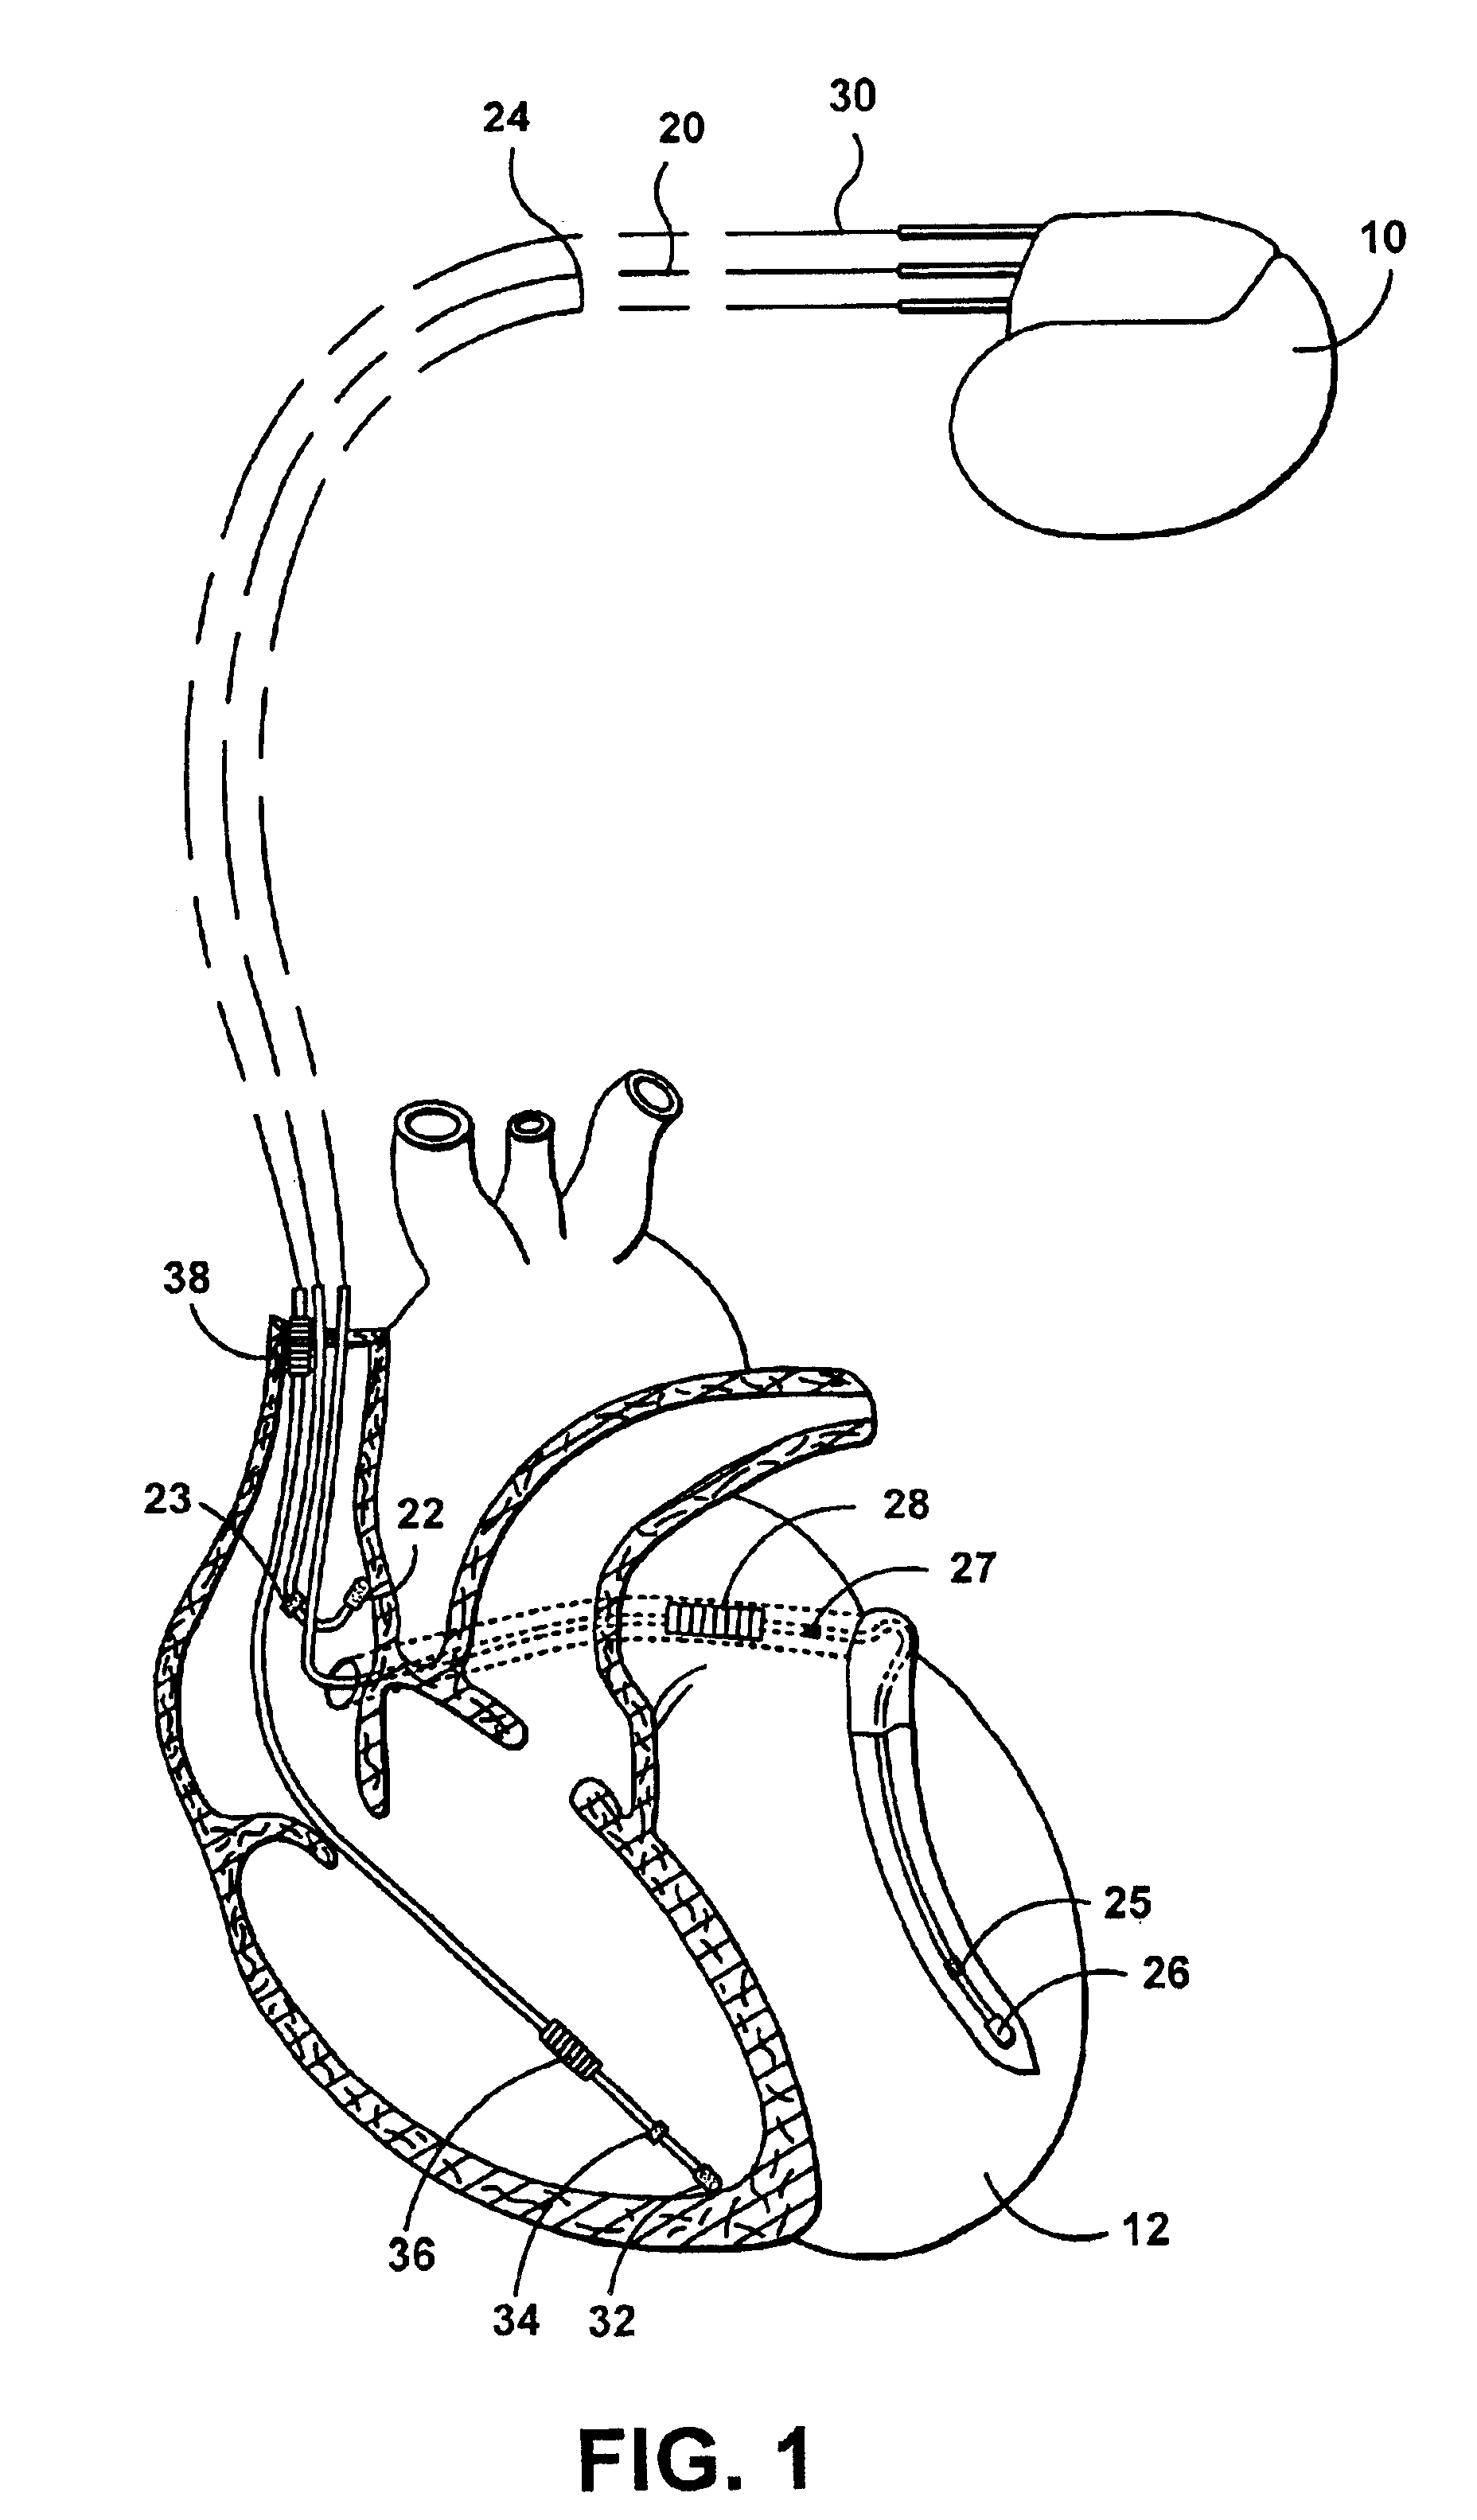 Automatic capture using independent channels in bi-chamber stimulation